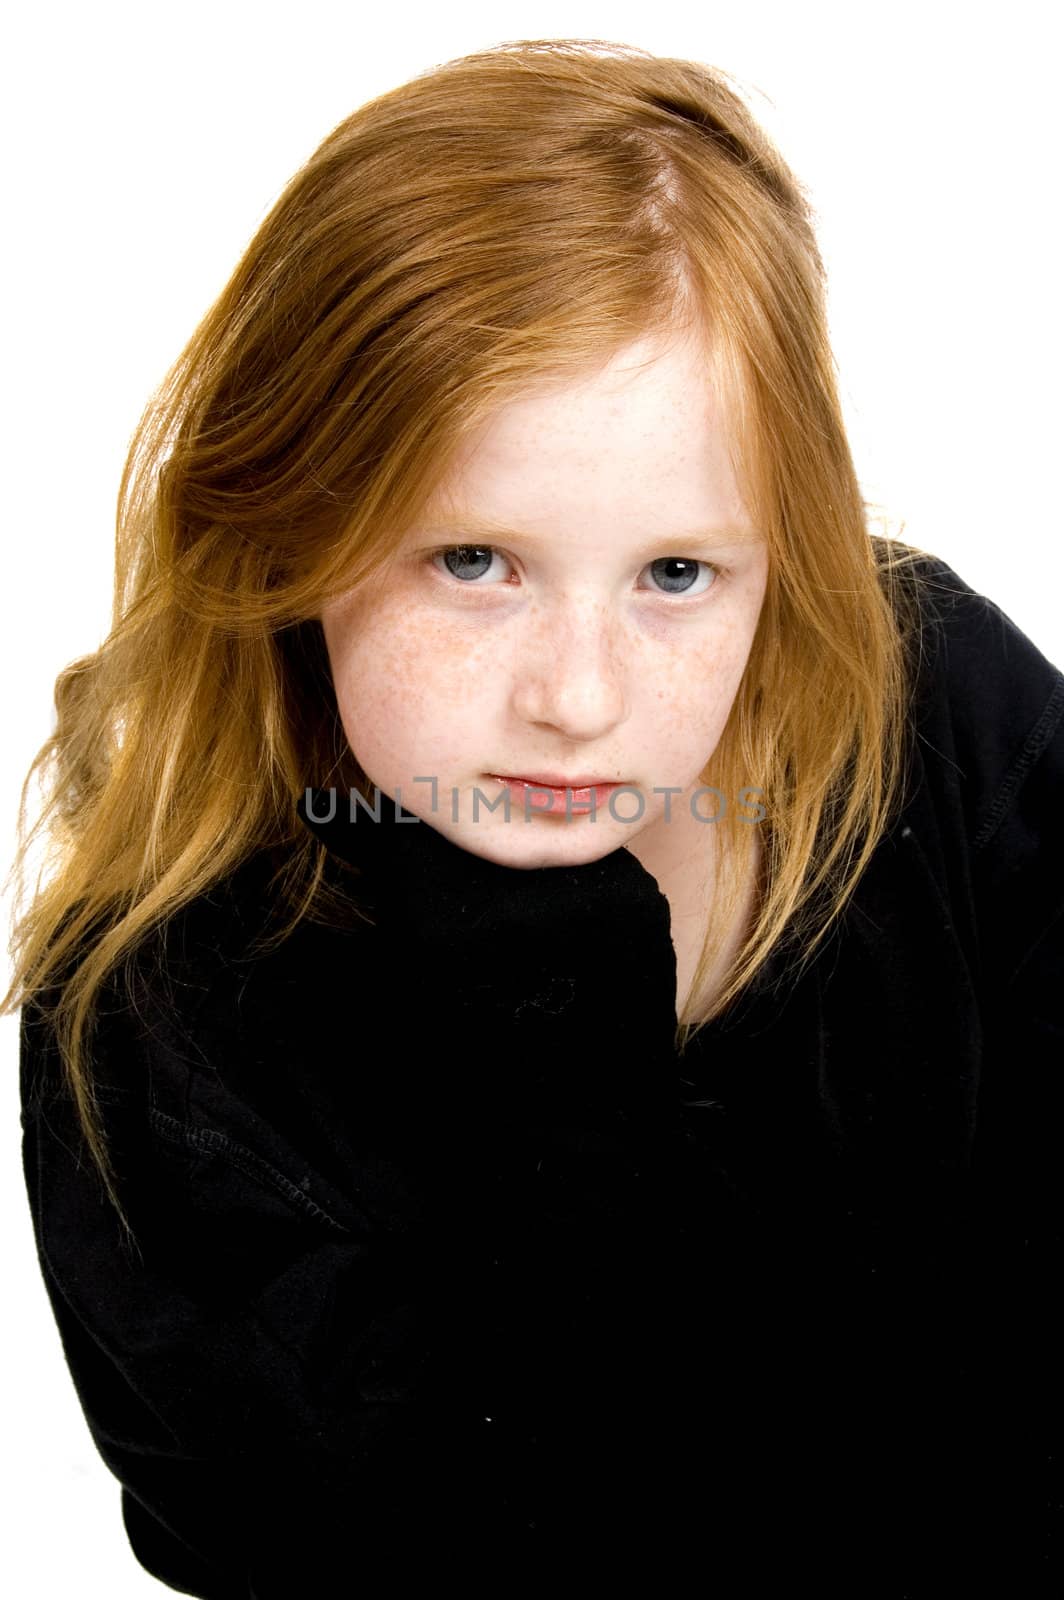 little girl with black glove is thinking